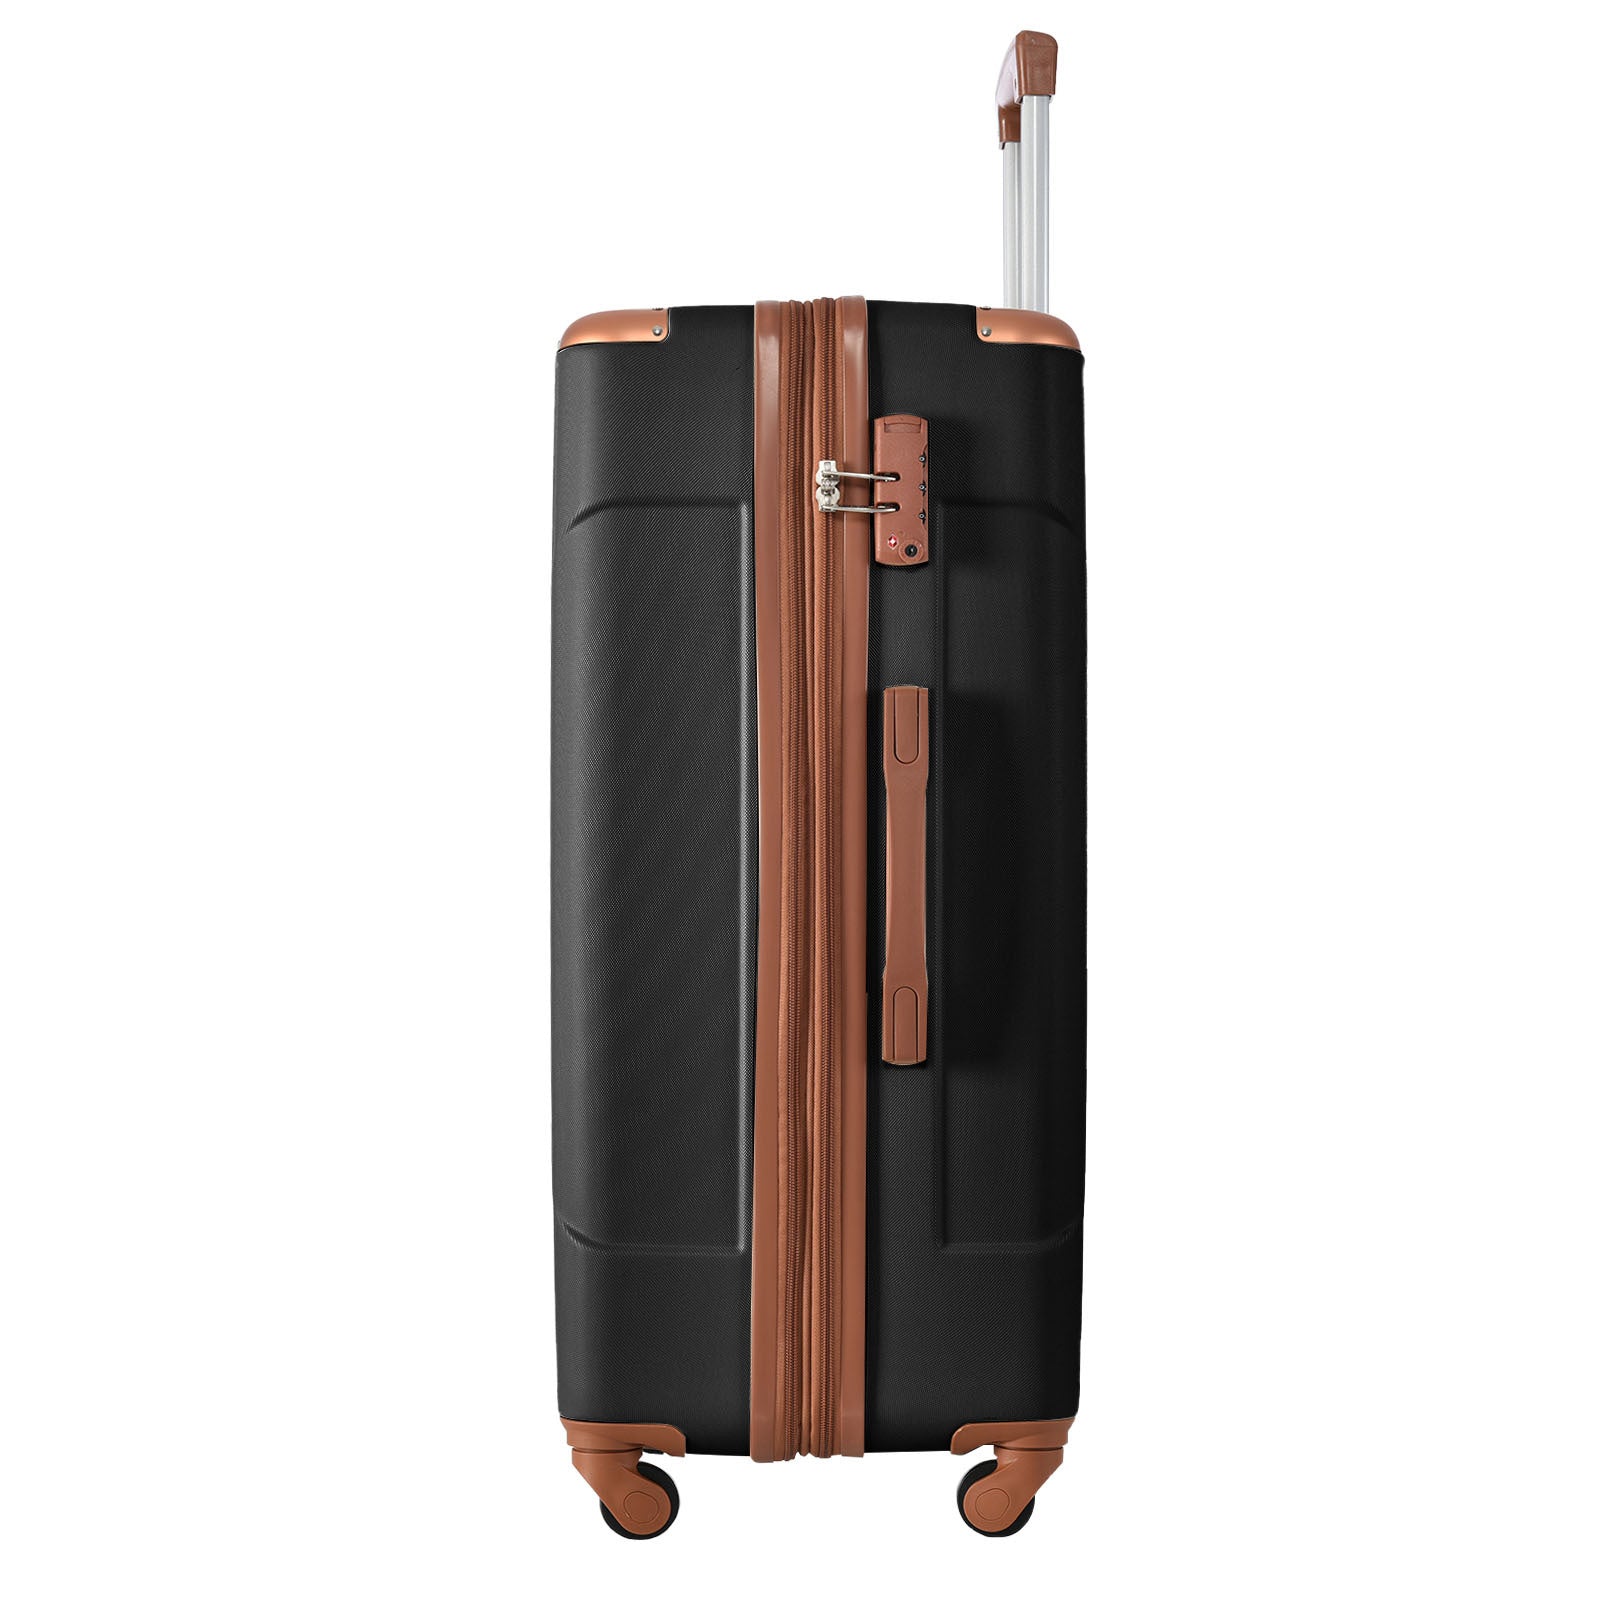 Hardside Luggage Sets 2 Piece Suitcase Set Expandable black brown-abs